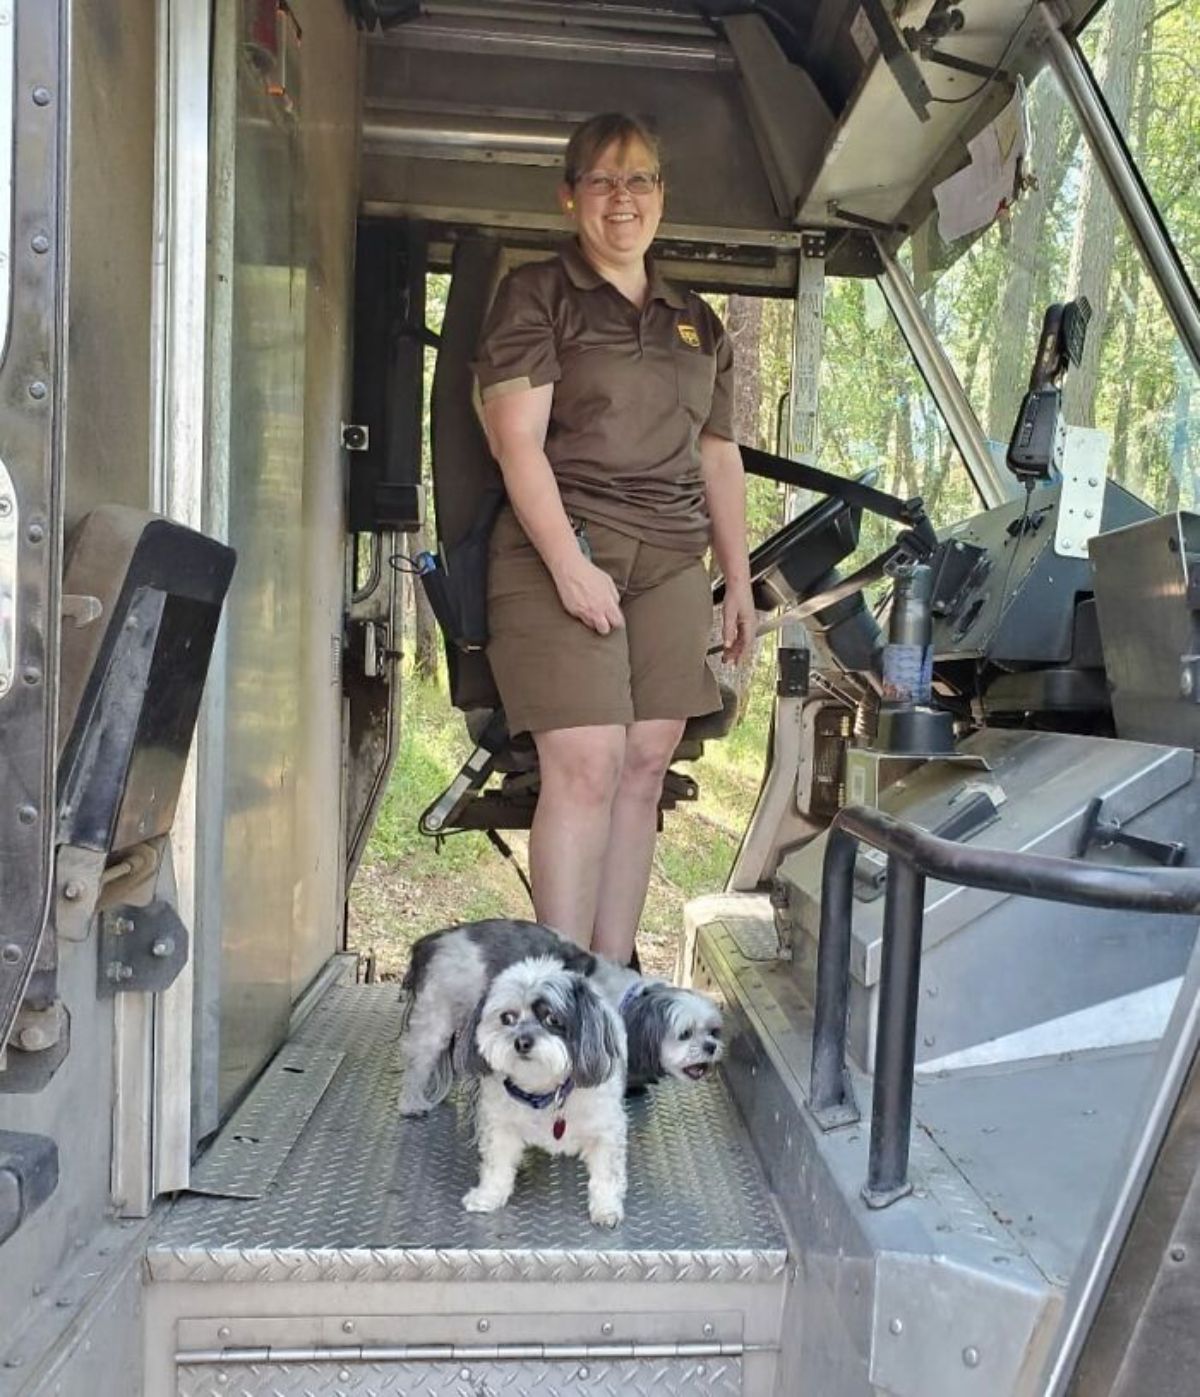 female ups driver standing in the truck with 2 small black and white fluffy dogs